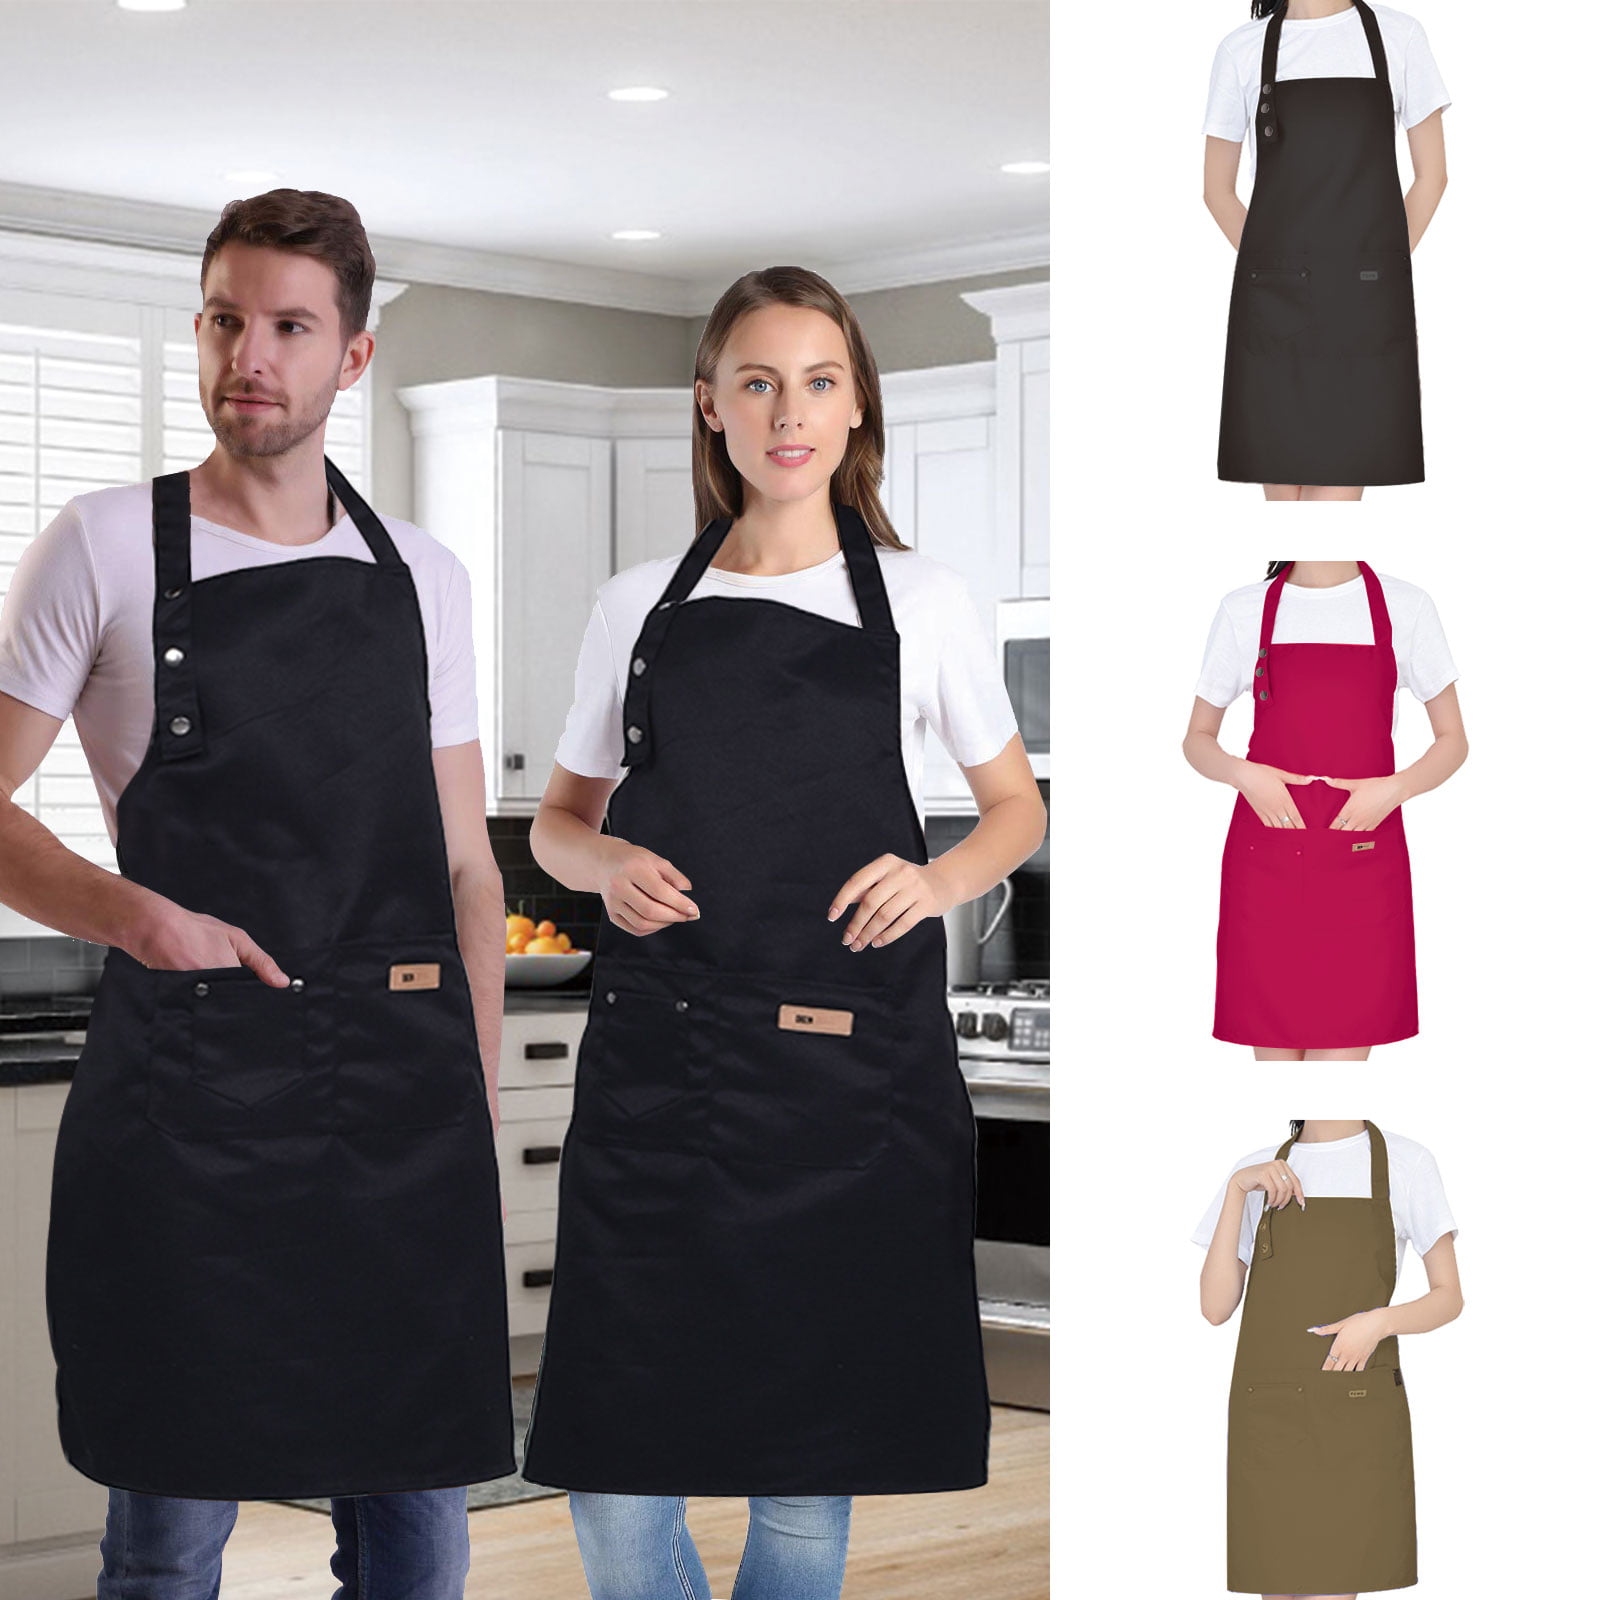 Kitchen Cooking Waist Apron Adjustable for BBQ Drawing Women Men Chef Black/Red